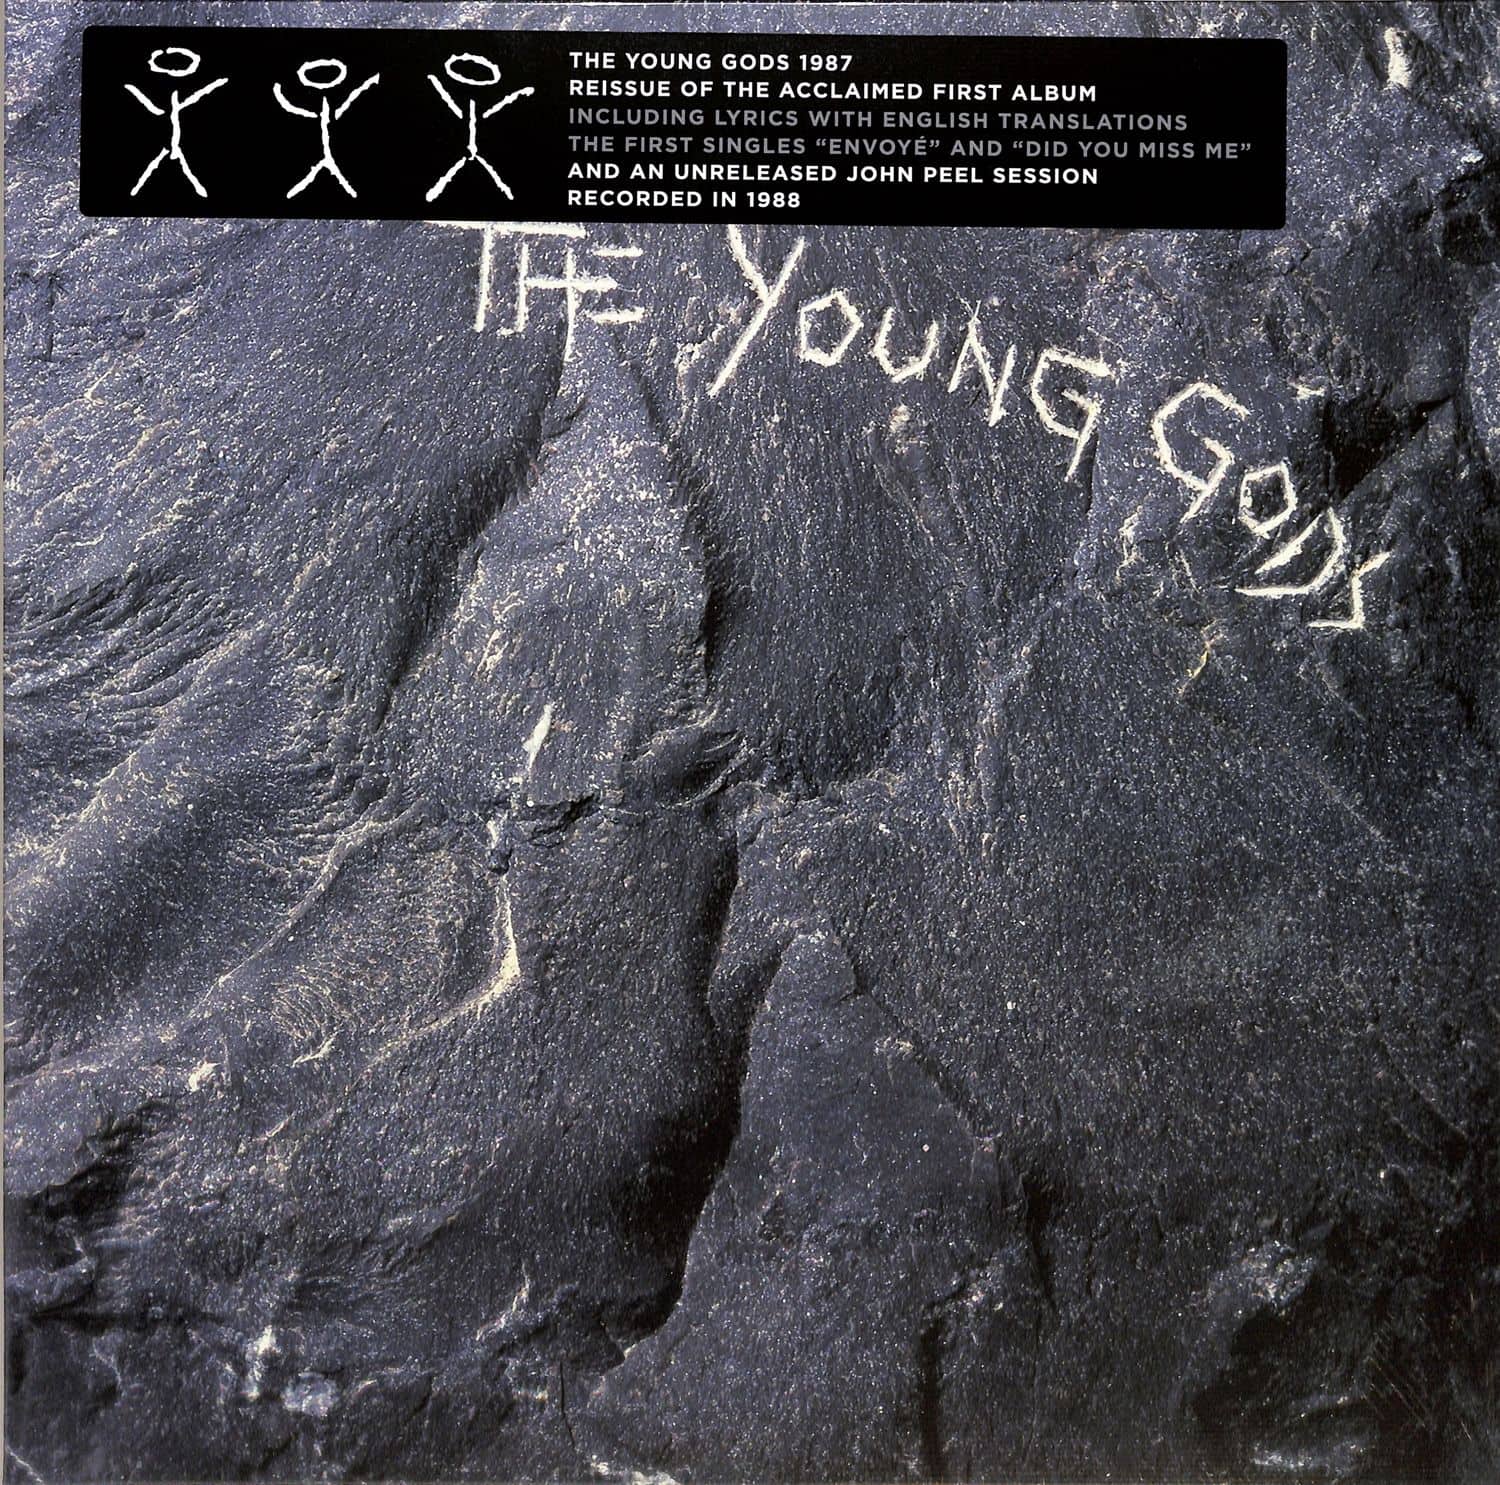 The Young Gods - THE YOUNG GODS 